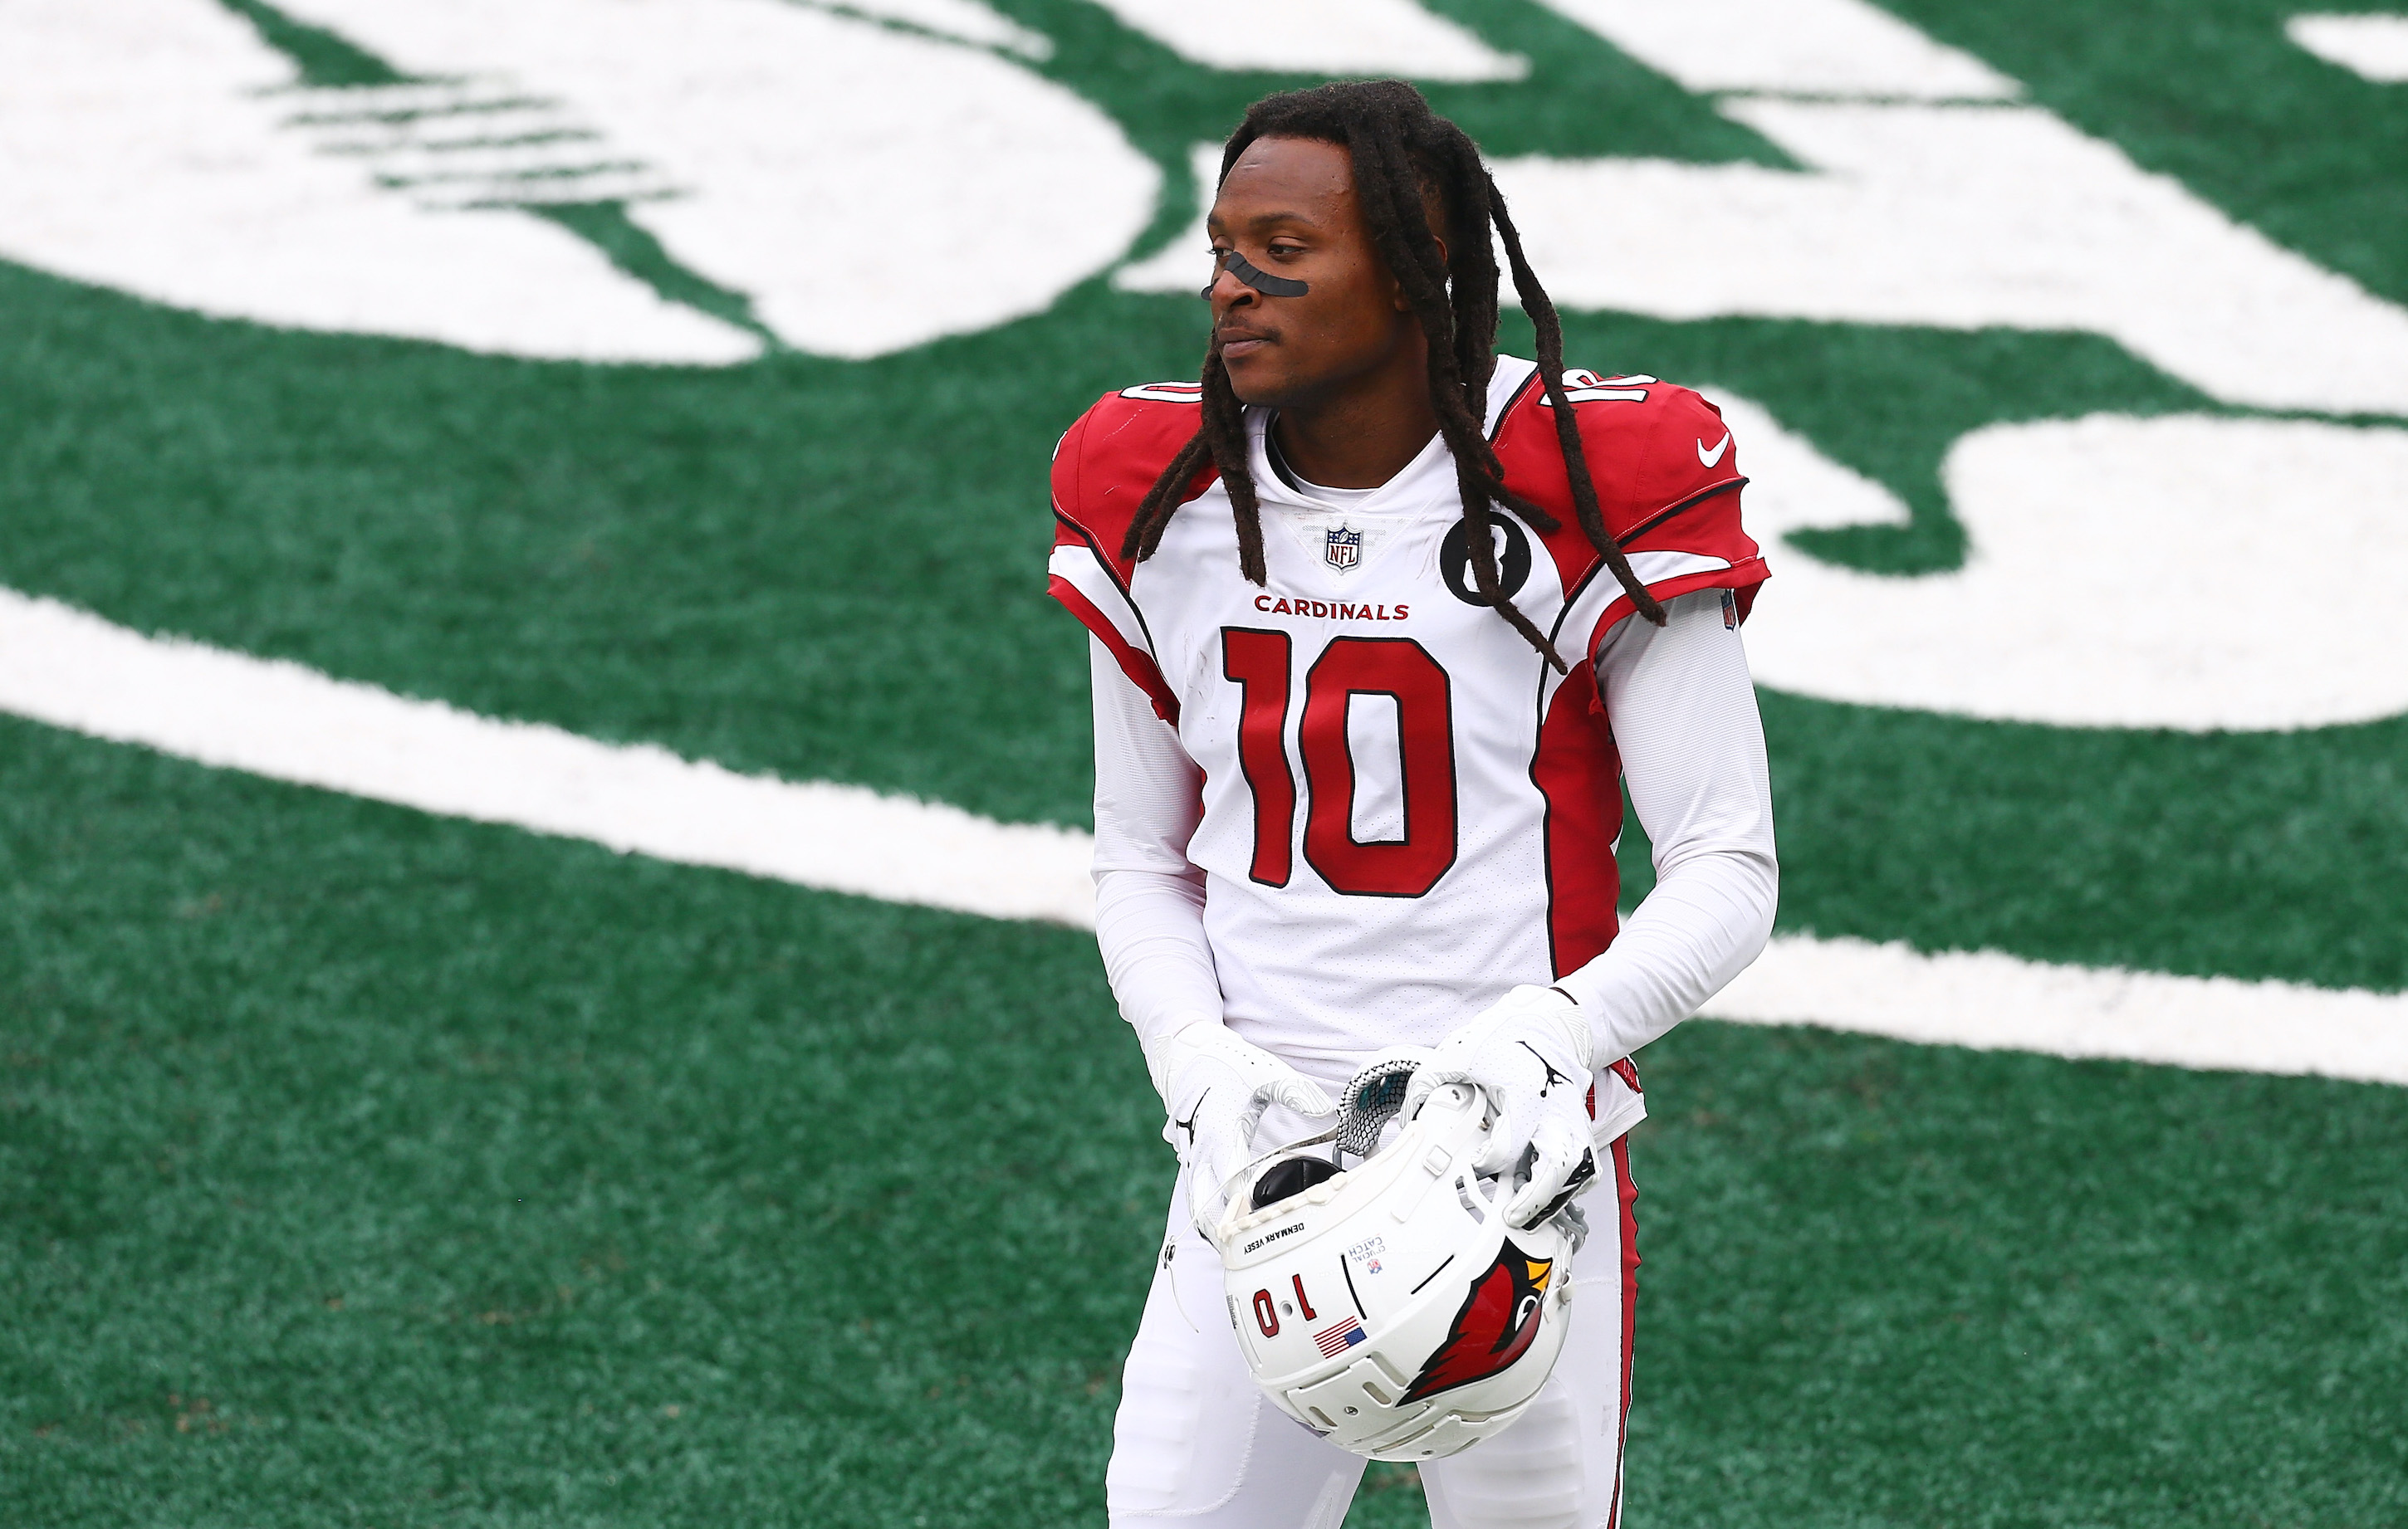 DeAndre Hopkins of the Arizona Cardinals stands with his helmet off.